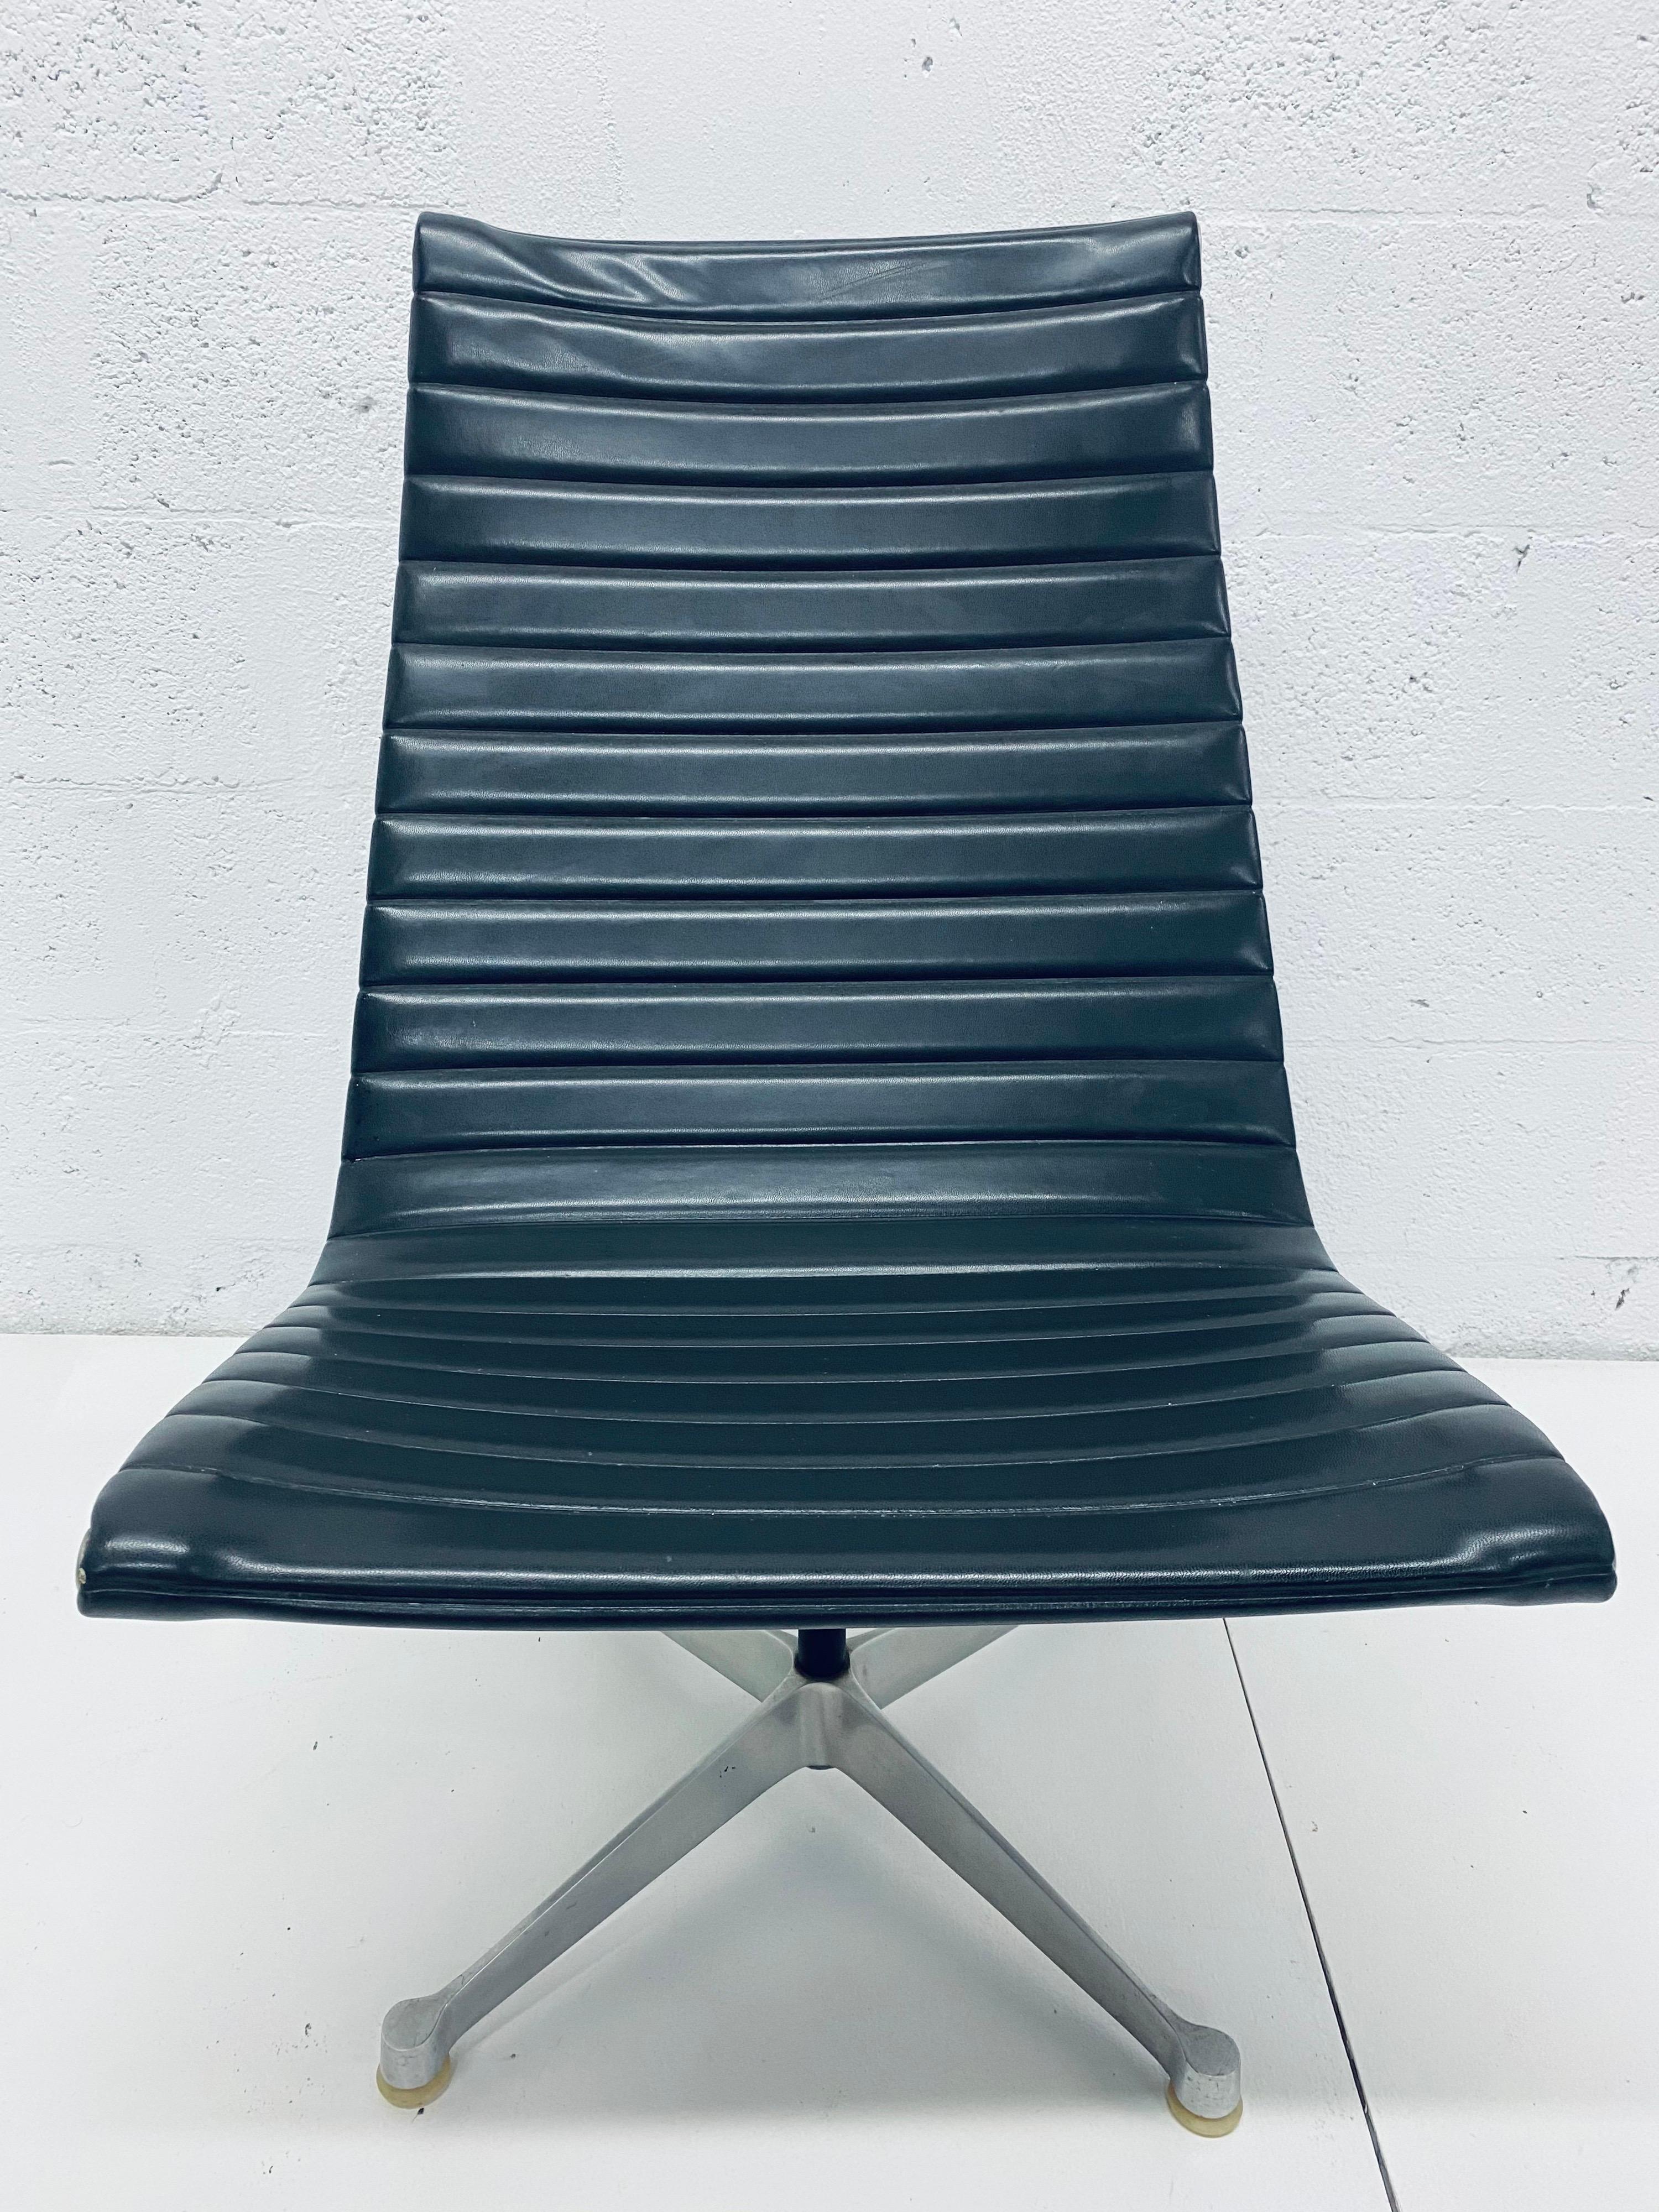 Early edition Charles and Ray Eames Aluminum Group lounge chair with dark gray eco-leather seat on aluminum swivel base for Herman Miller, circa 1950-60s.